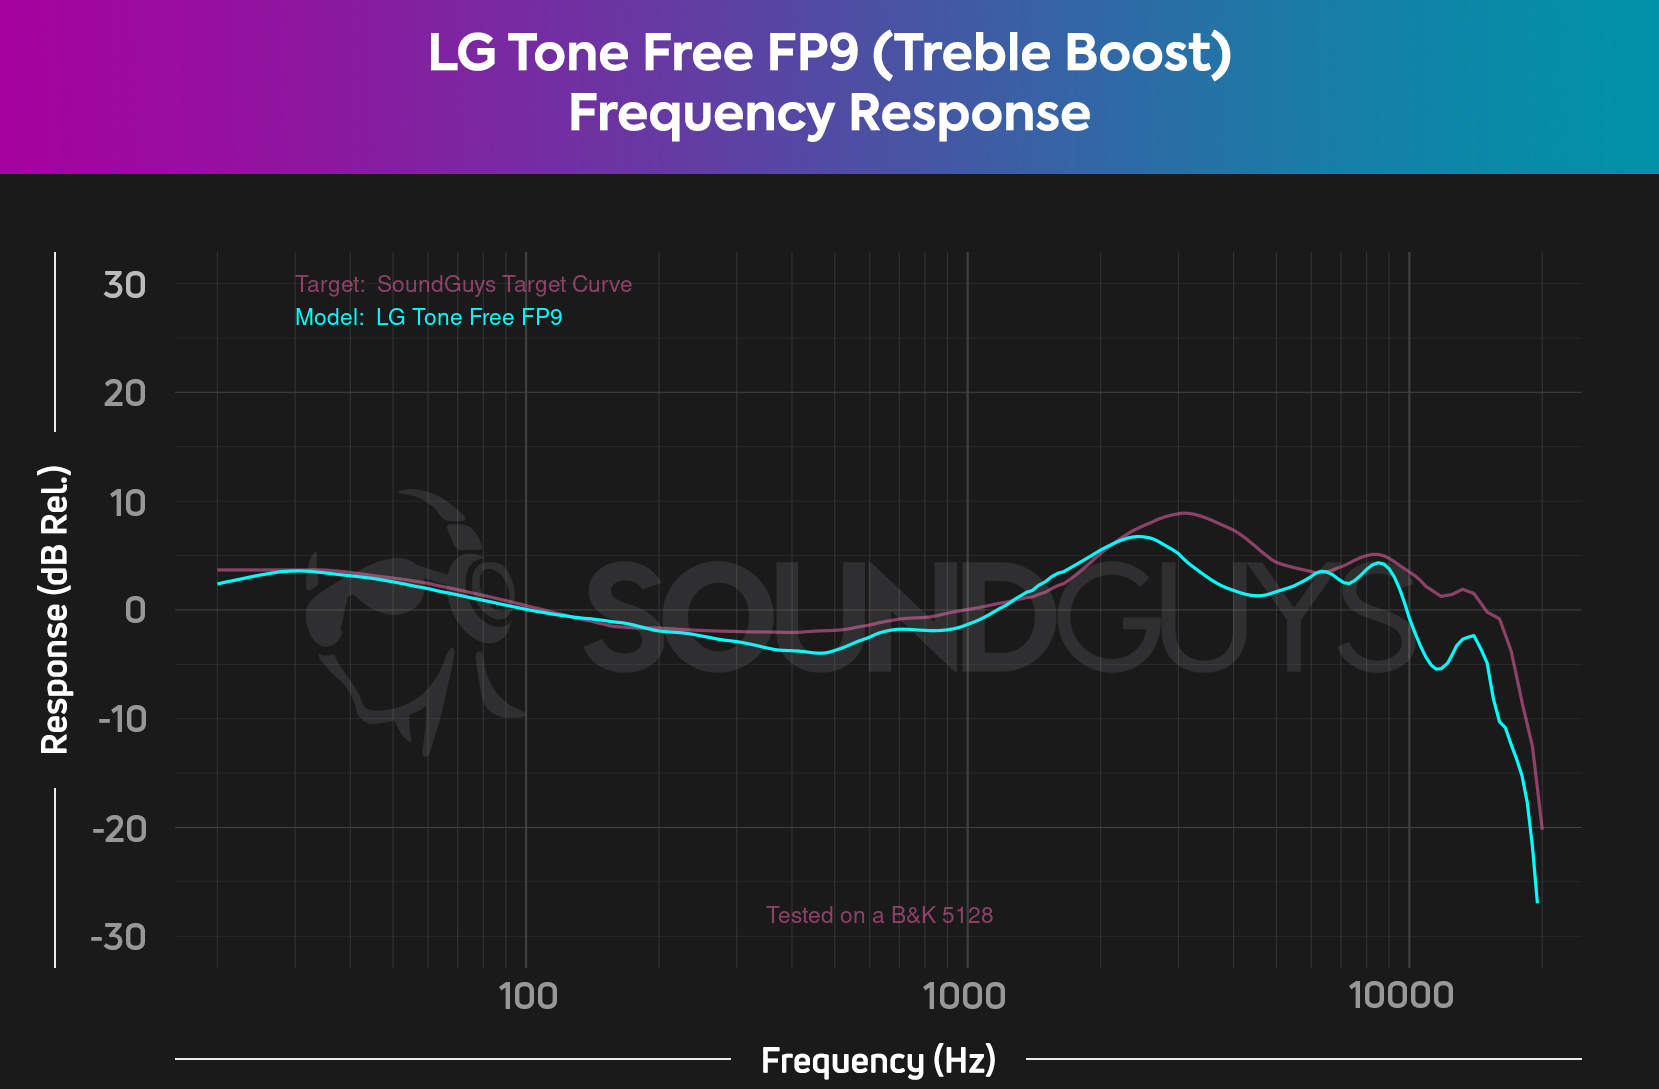 For some reason, the "treble boost" option always seems to be the most accurate preset for LG earbuds.